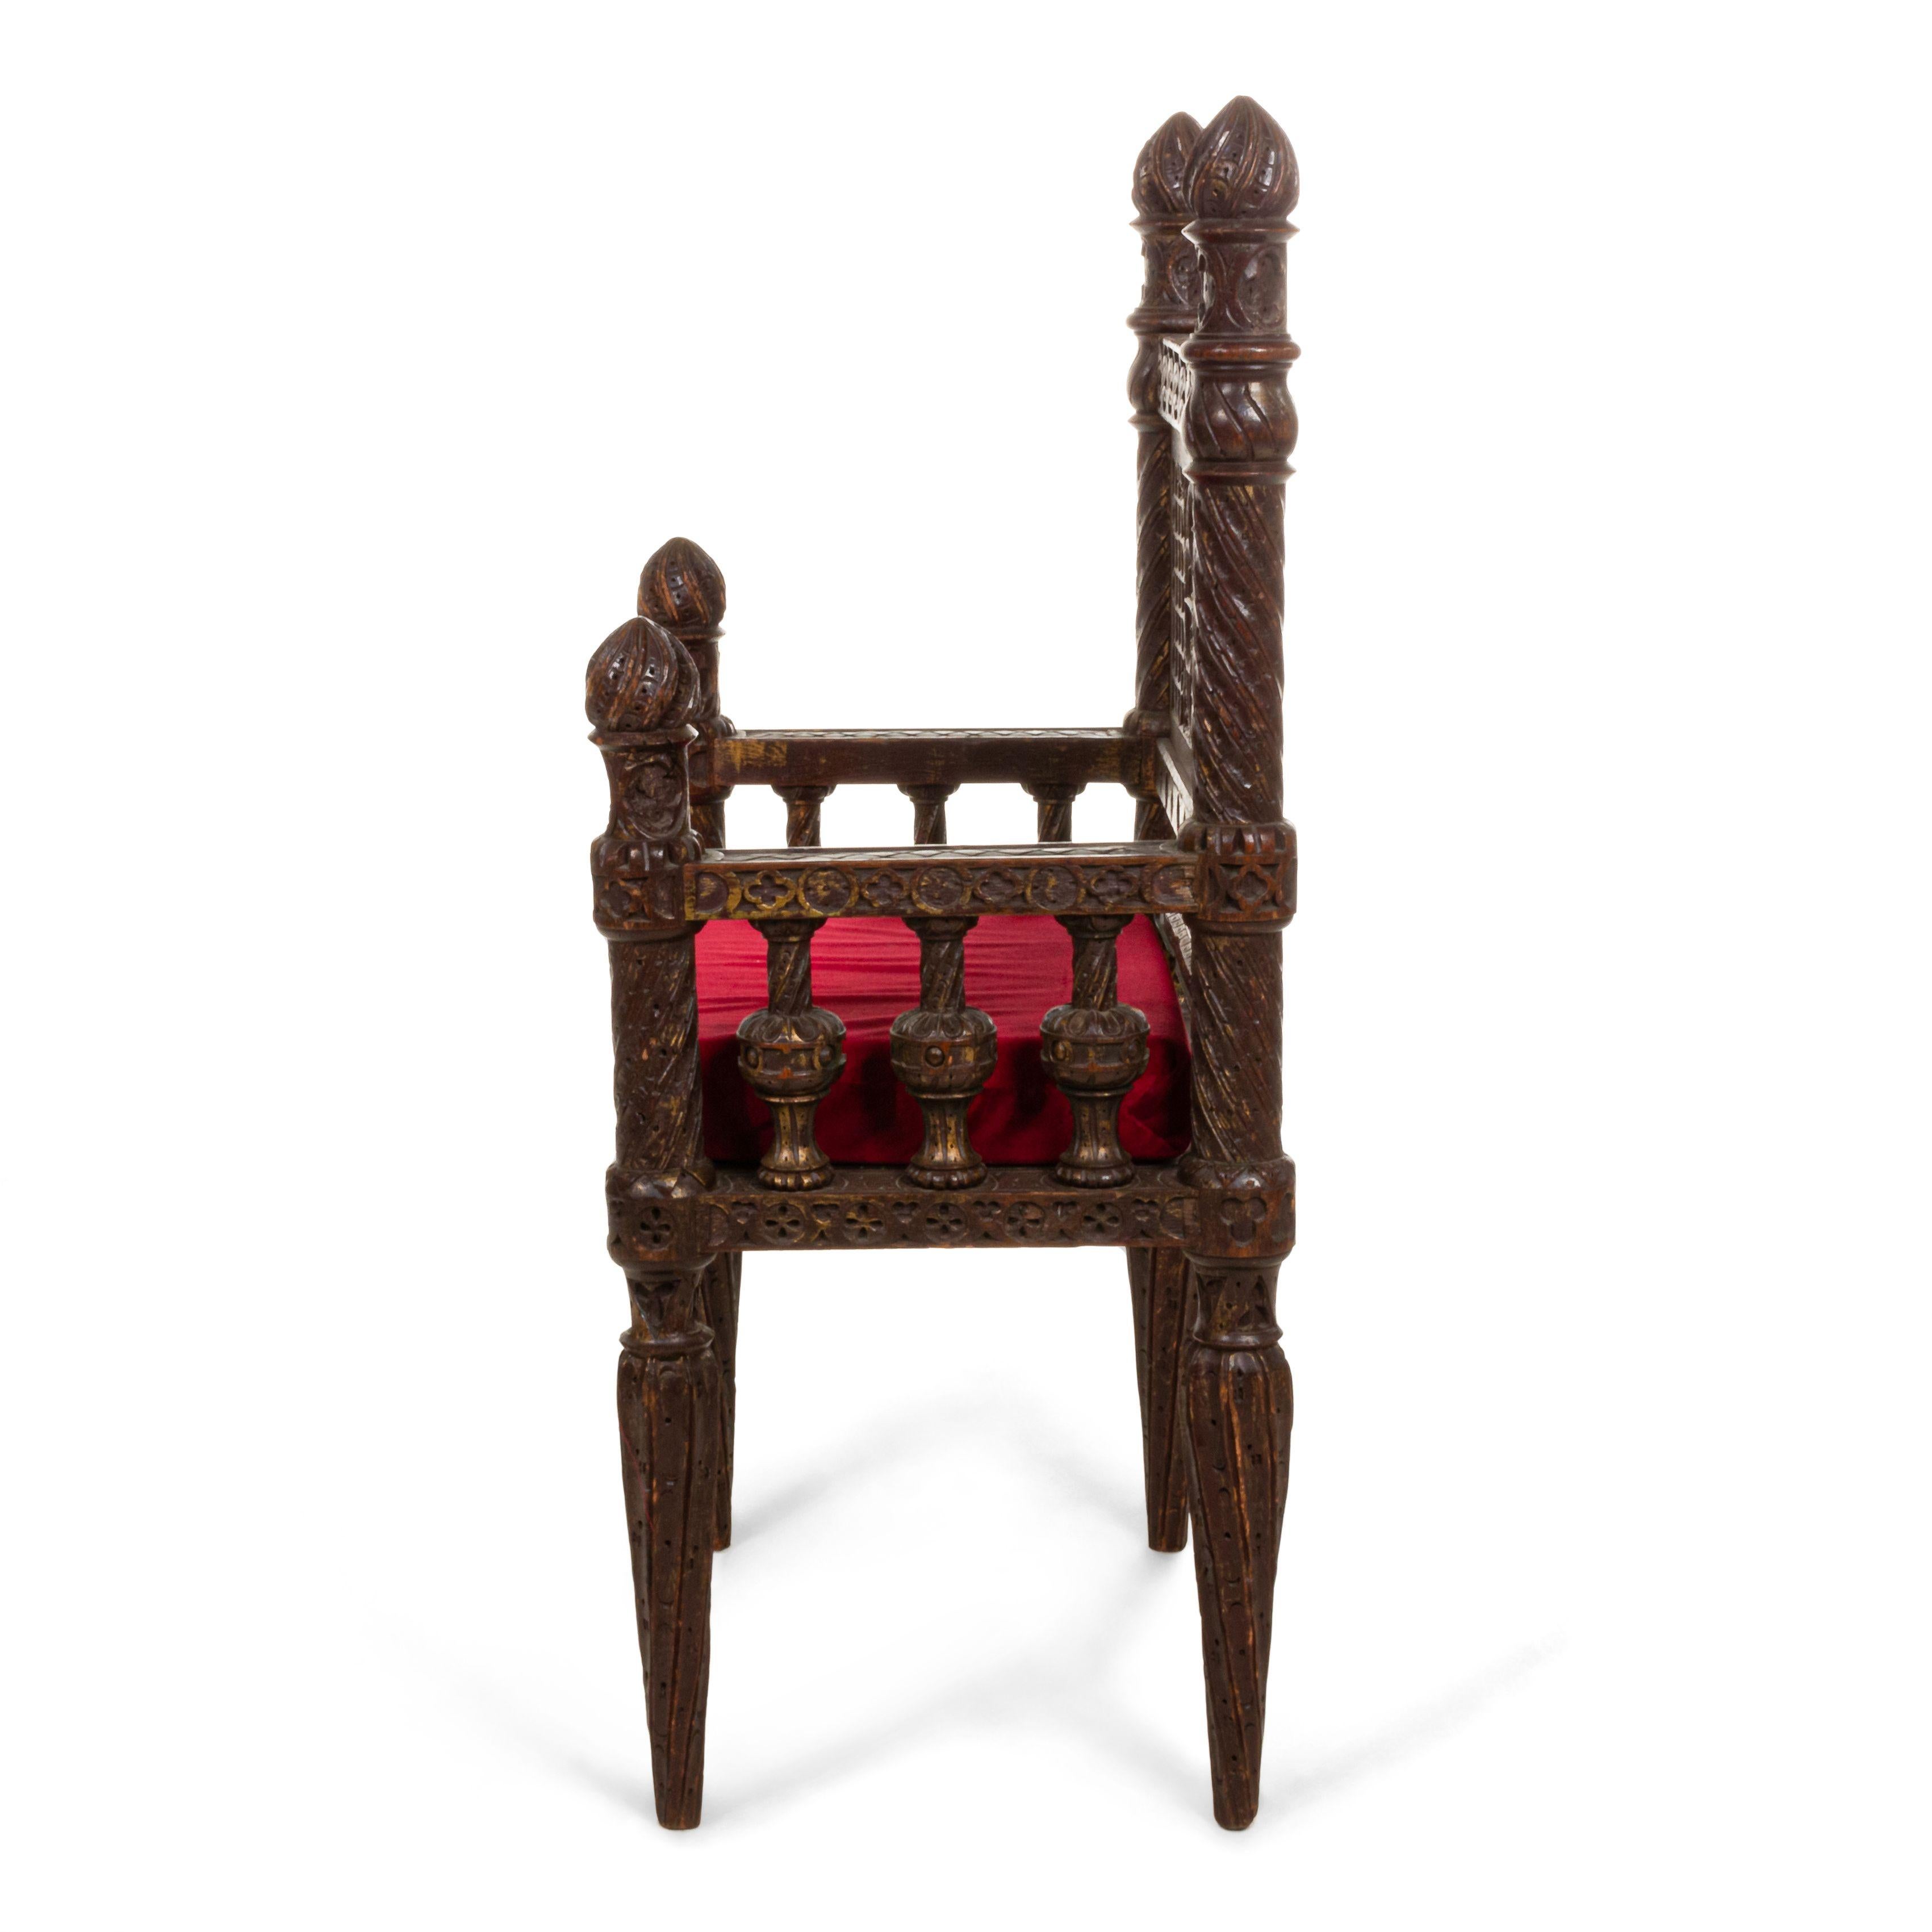 English Victorian Gothic Revival style carved burgundy painted & gold trim small (throne) arm chair with carved center medallion and finials on back.
 